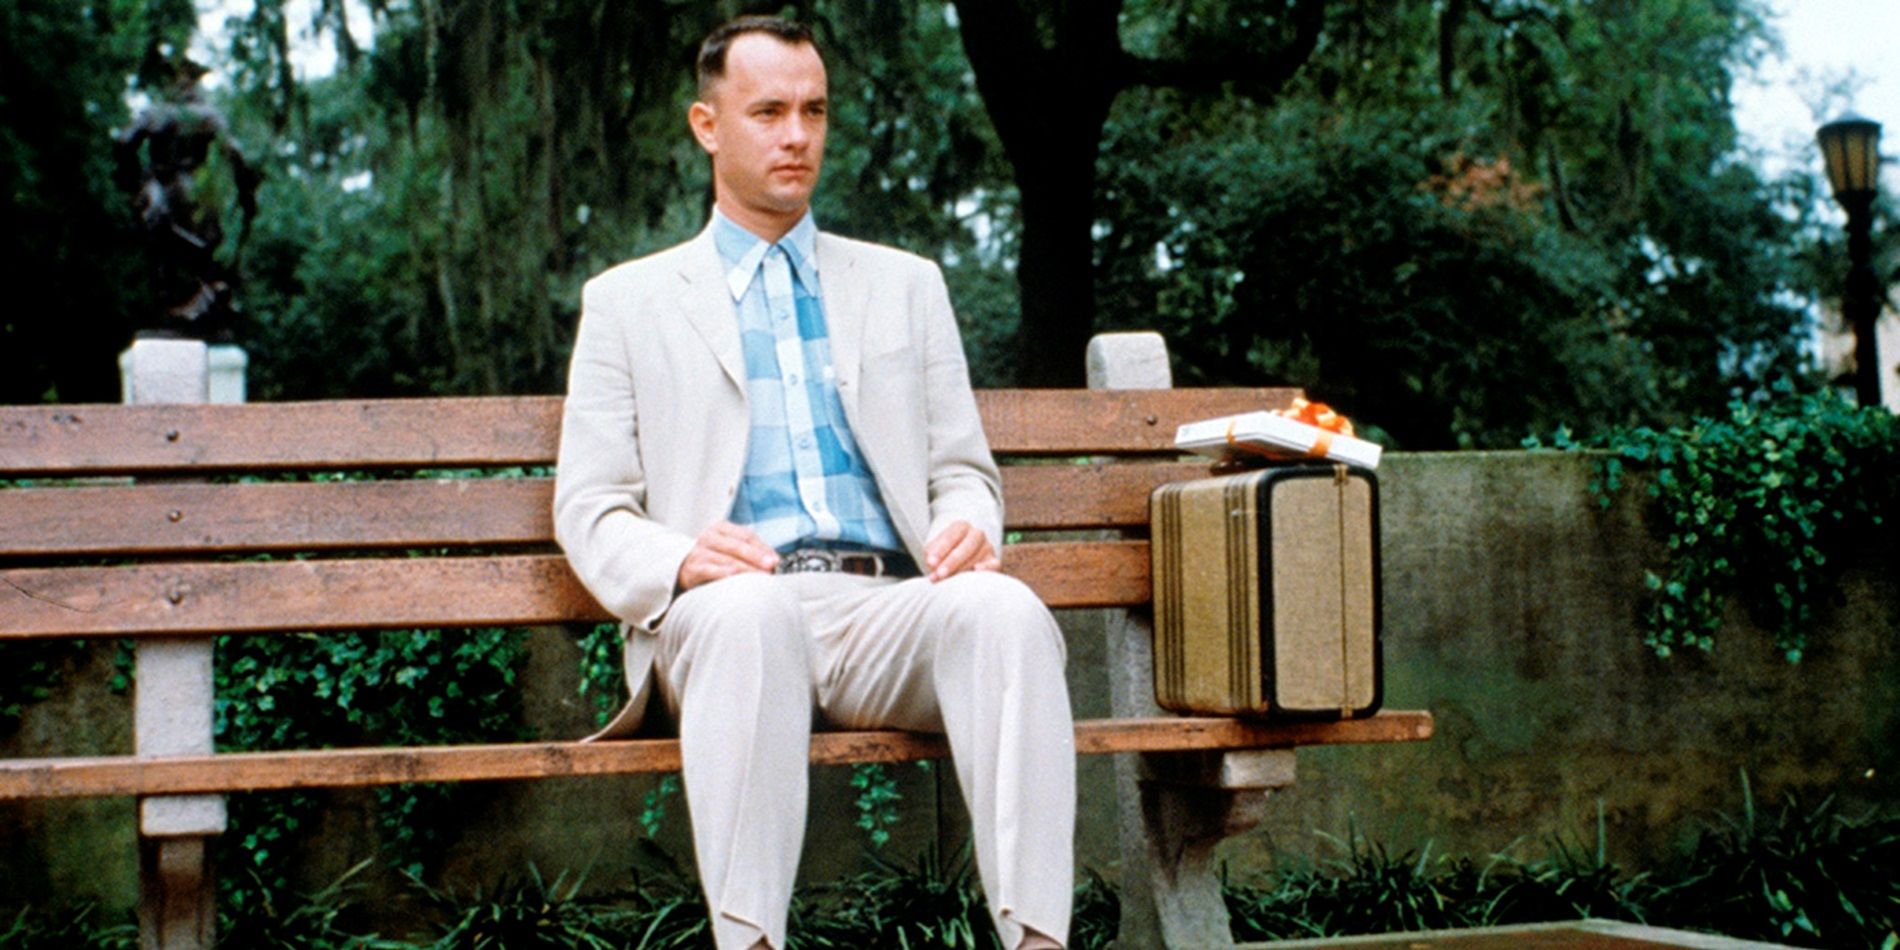 Forrest sits on a bench in Forrest Gump